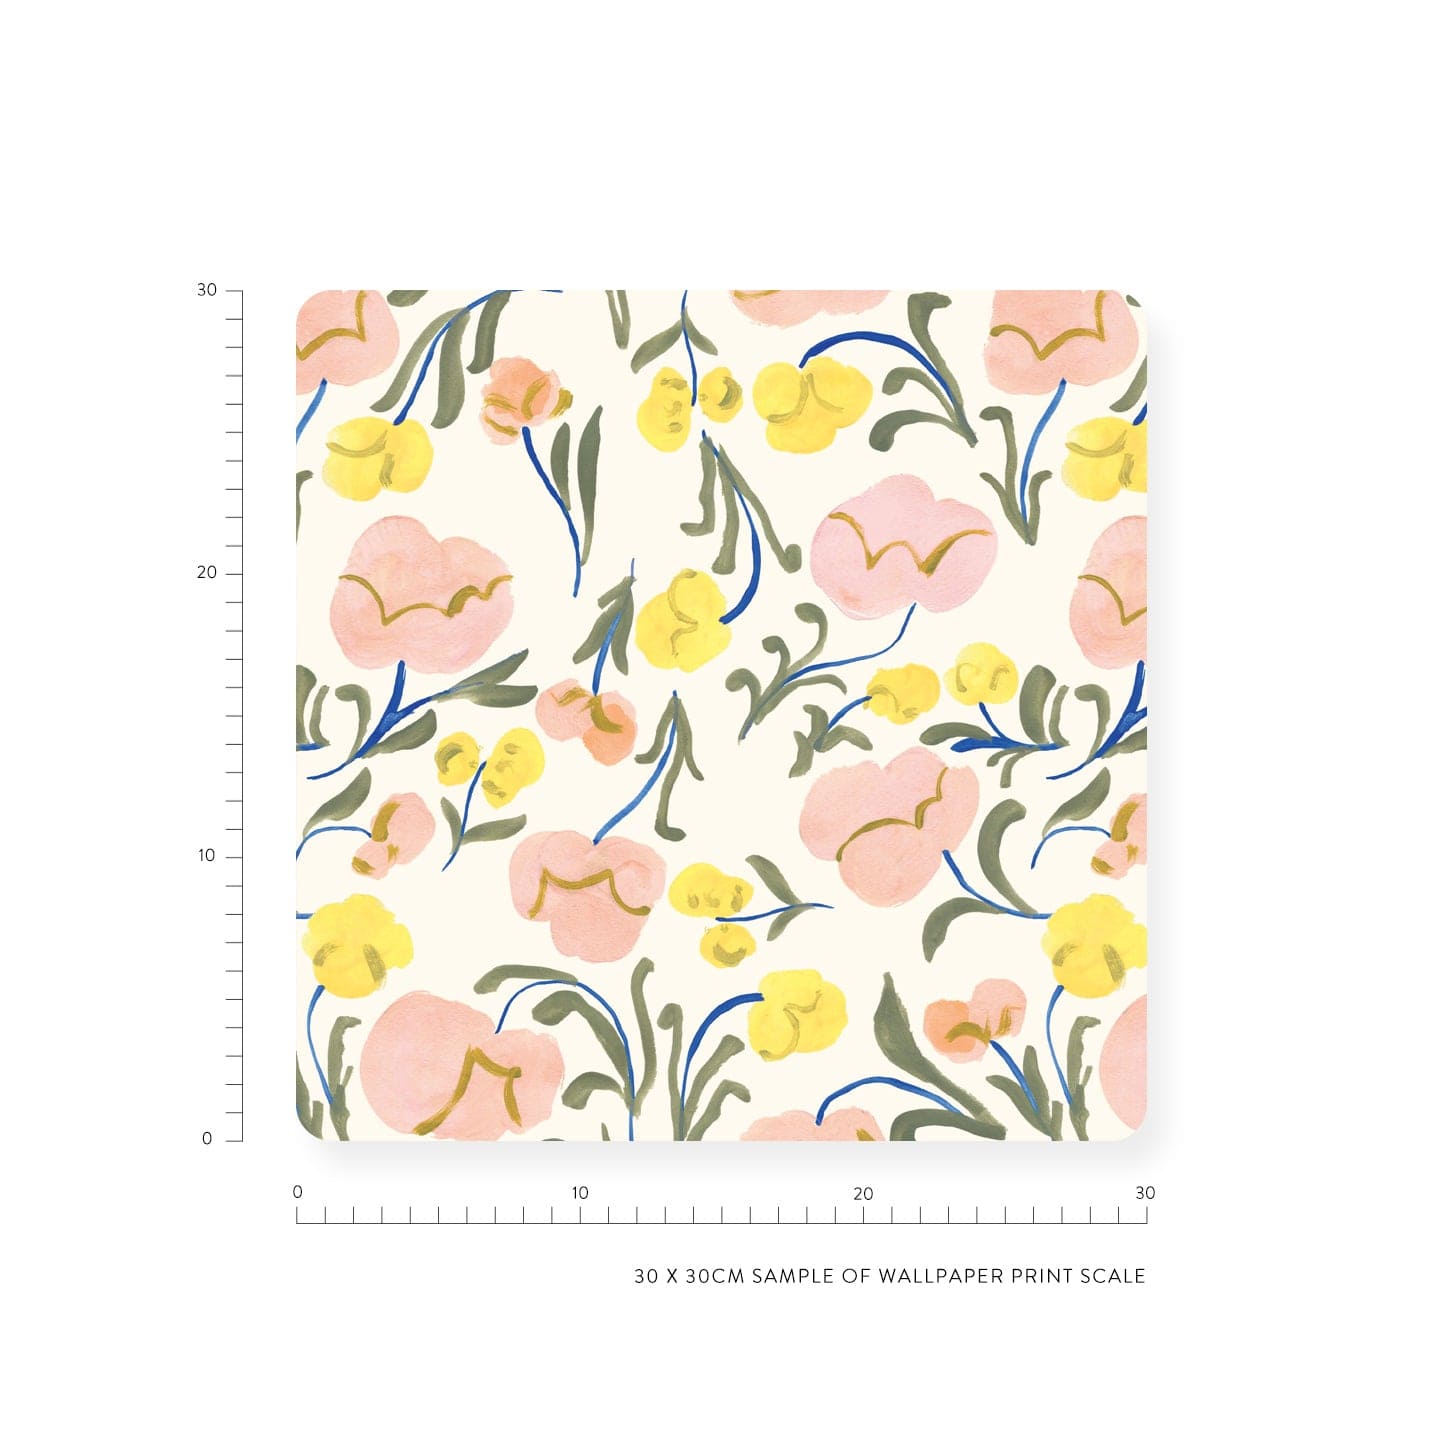 Floral wallpaper with pink and yellow flowers, blue stems and green leaves showing the scale of the wallpaper